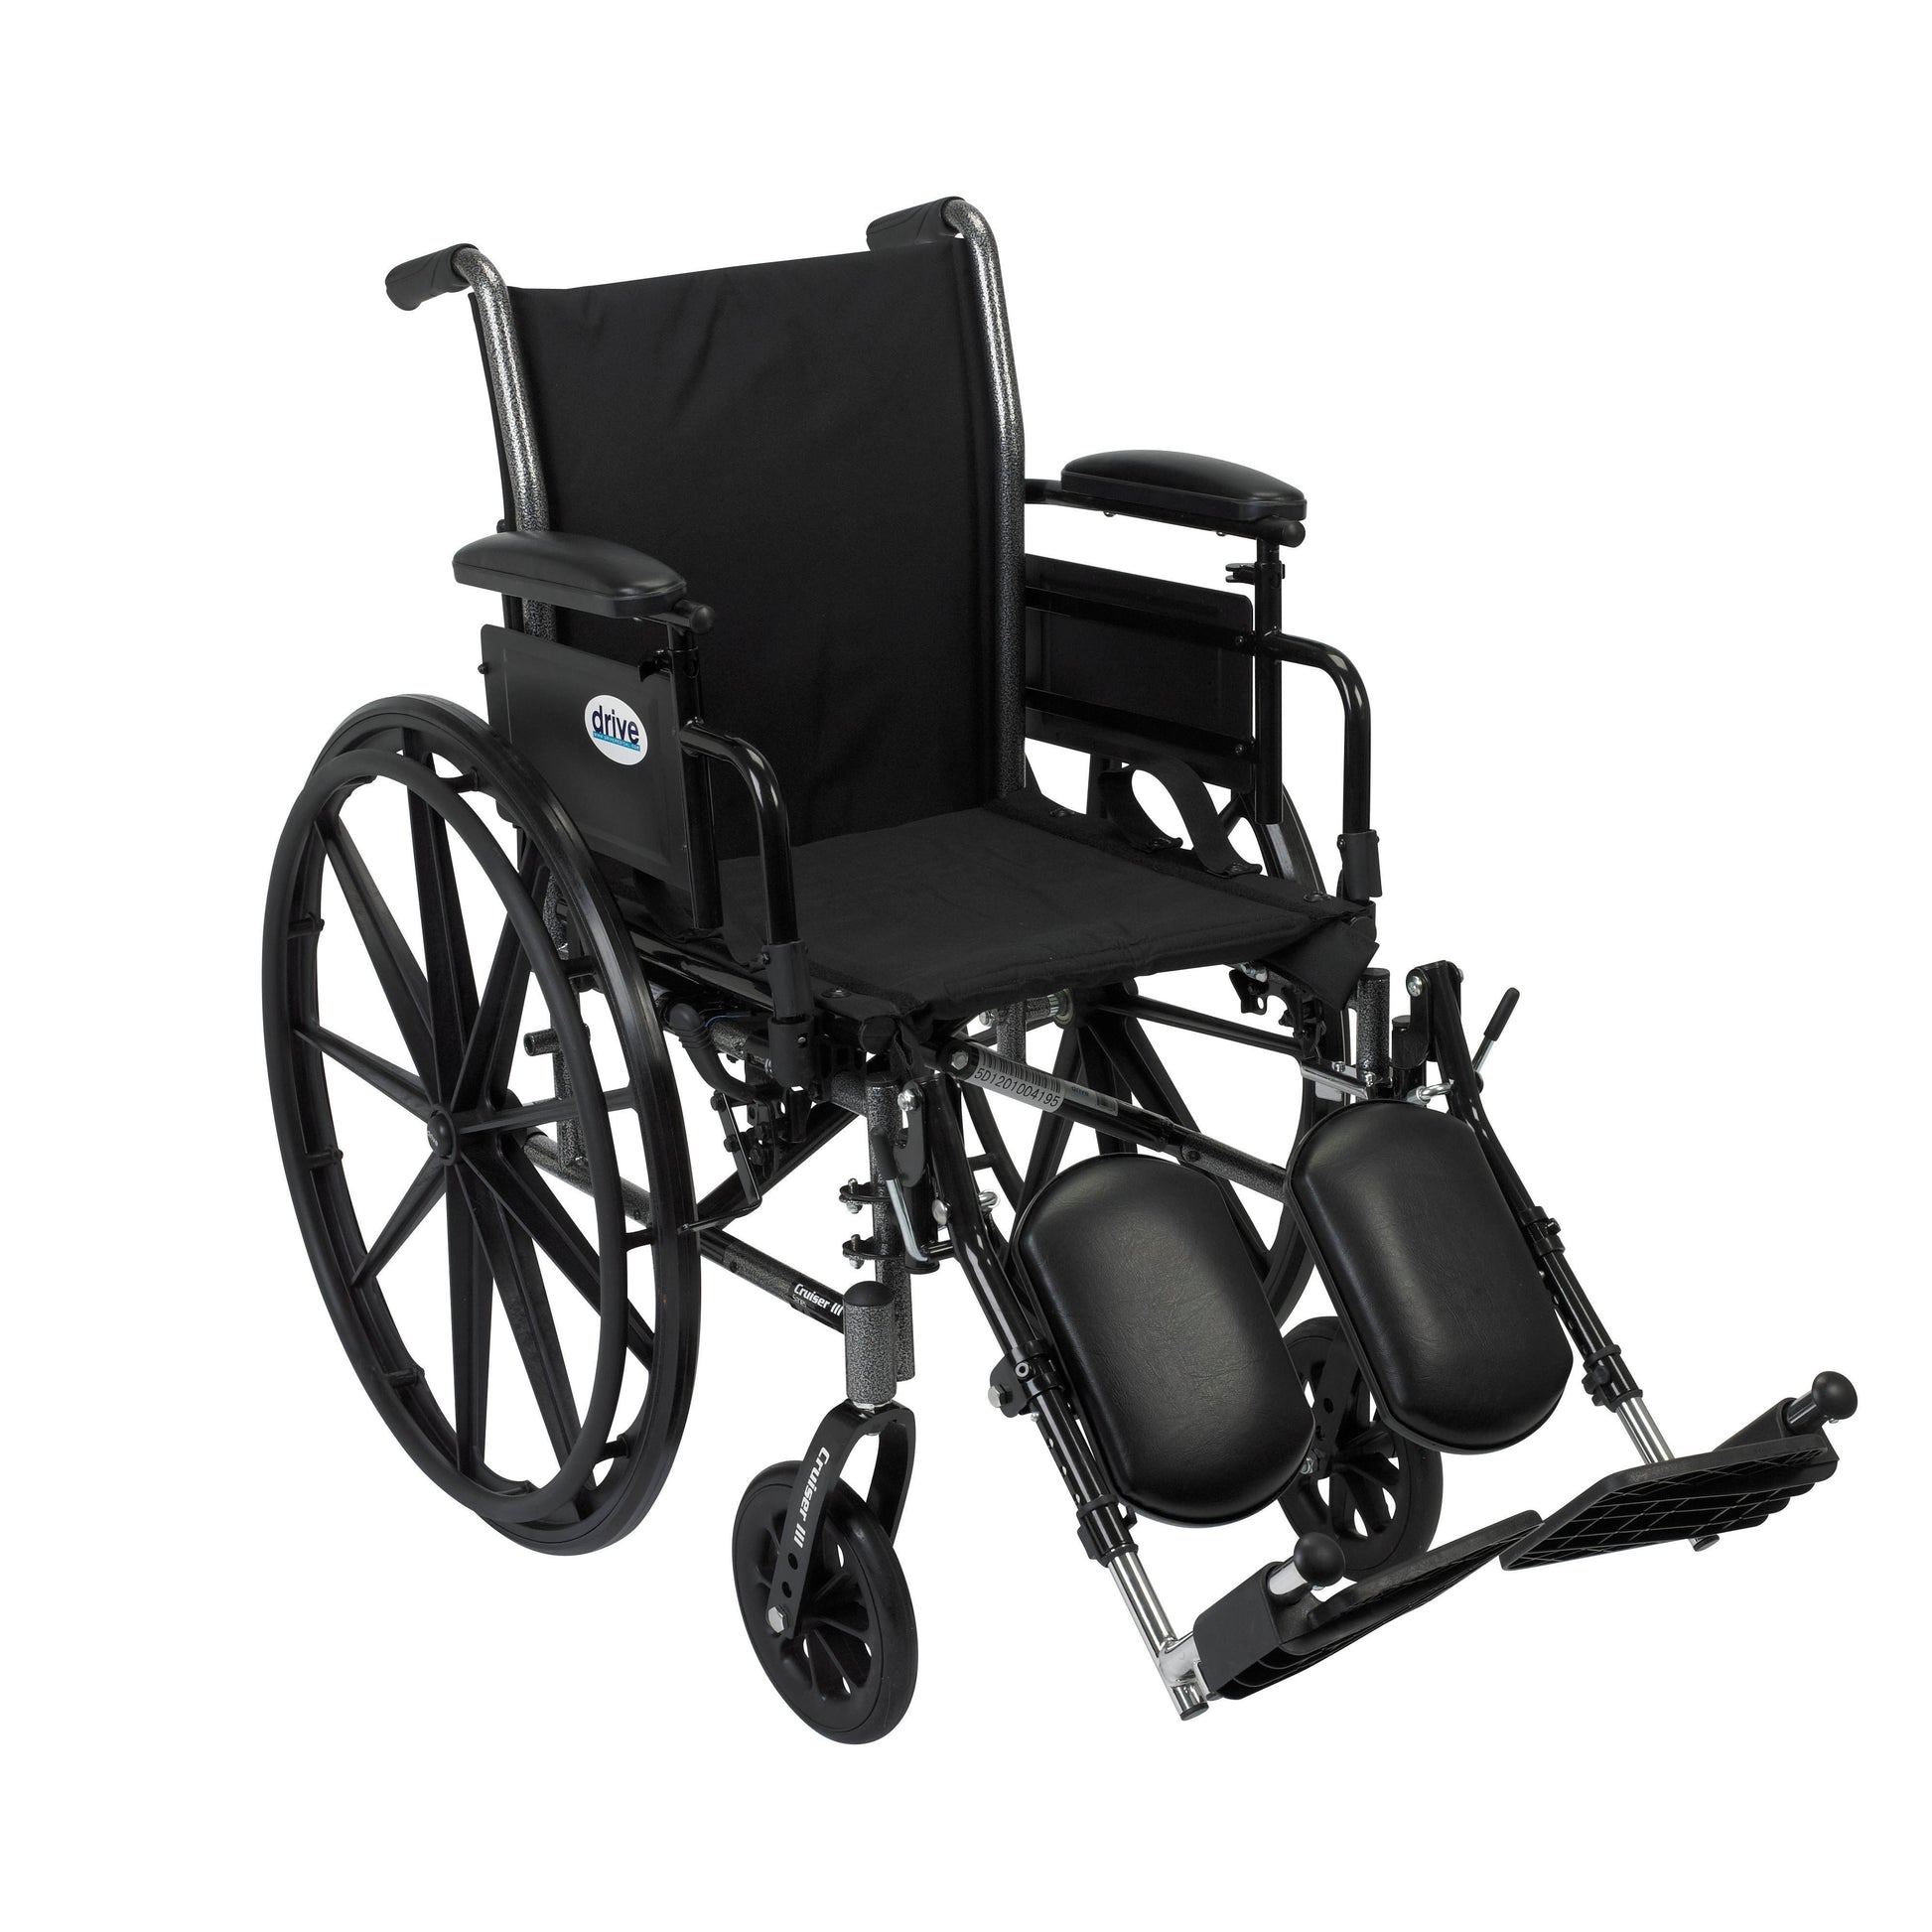 Cruiser III Light Weight Wheelchair with Flip Back Removable Arms, Adjustable Height Desk Arms, Elevating Leg Rests, 18"